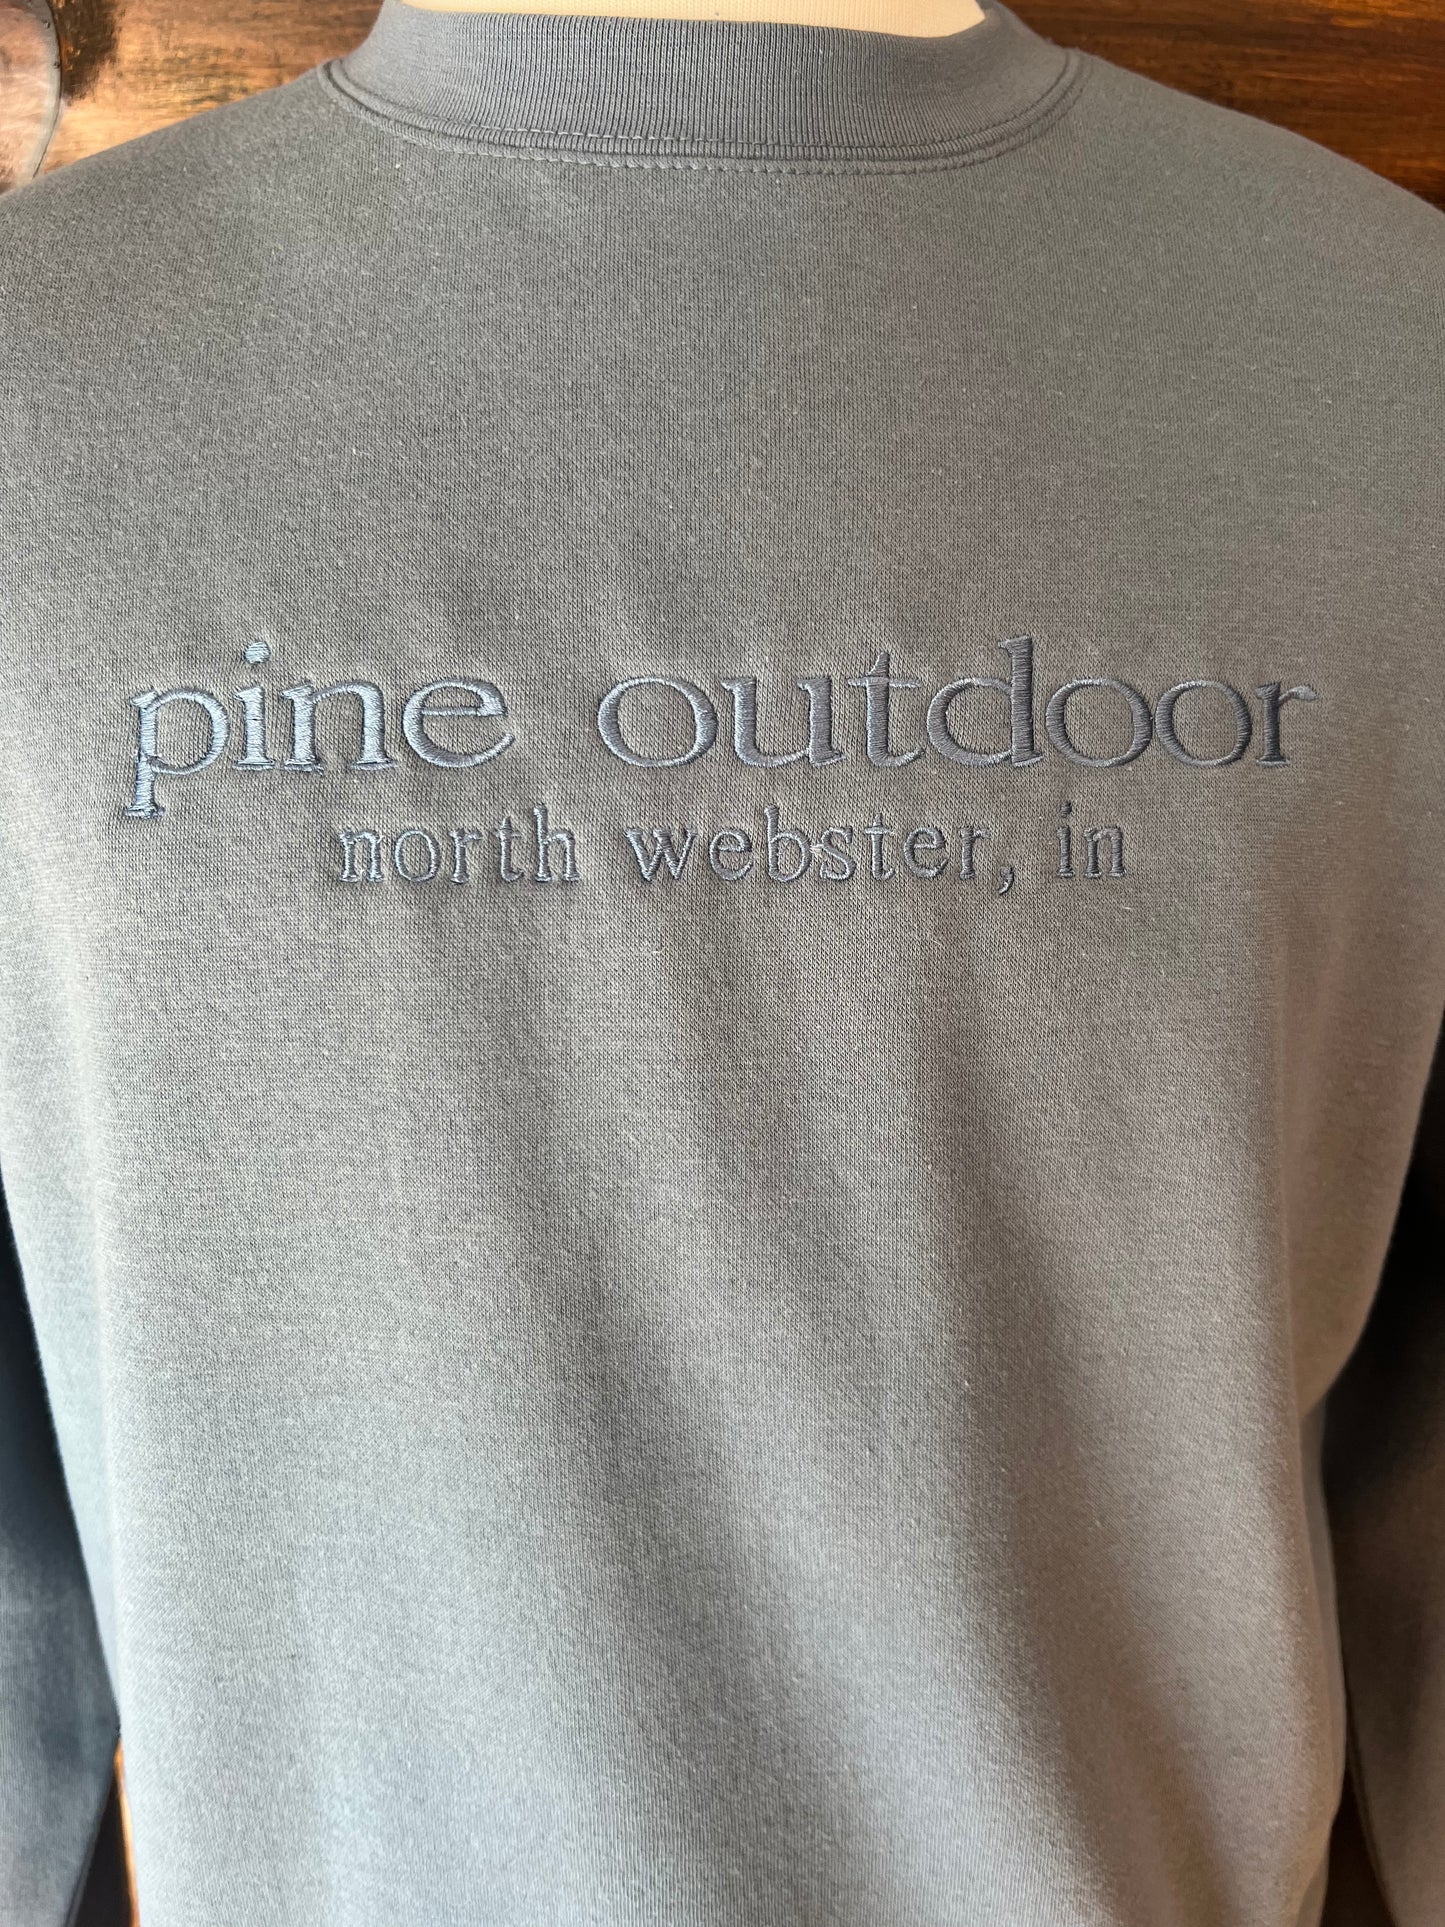 Pine Outdoor Apparel Embroidered Crew